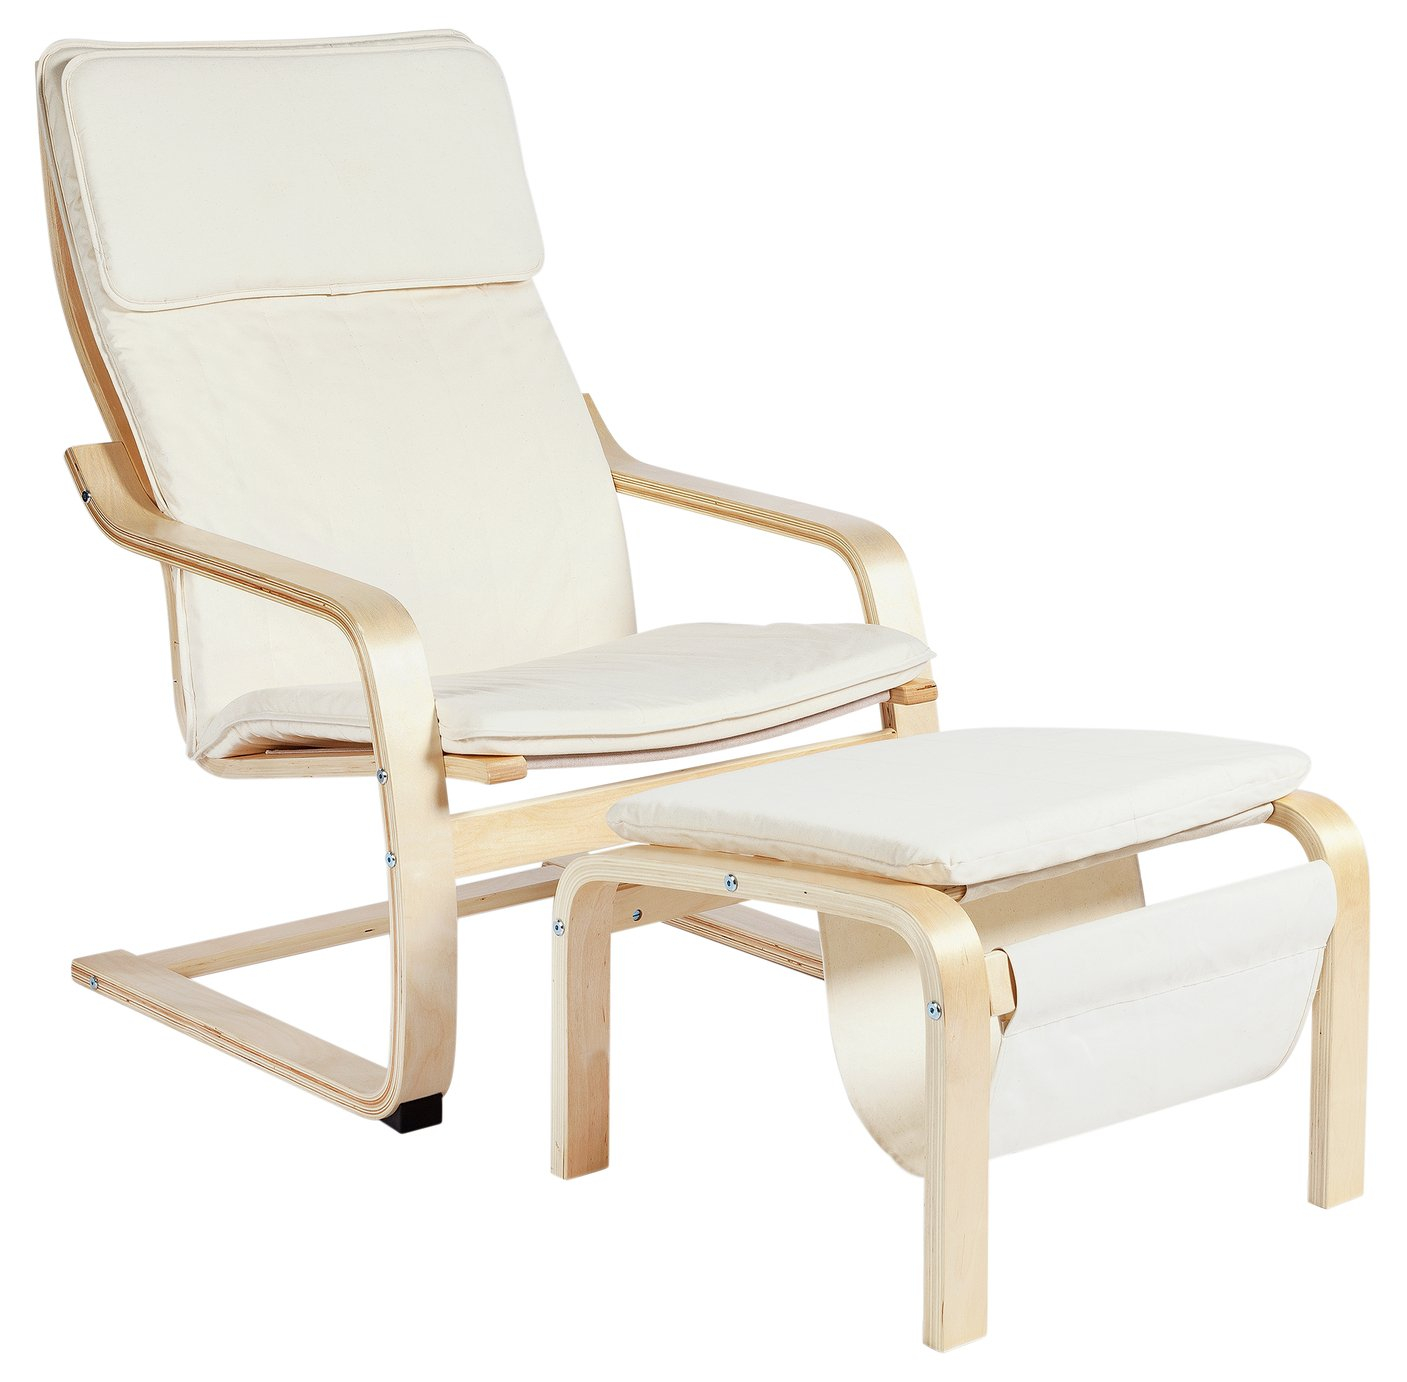 Habitat Bentwood High Back Chair & Footstool (2 Colours) now £67, Click